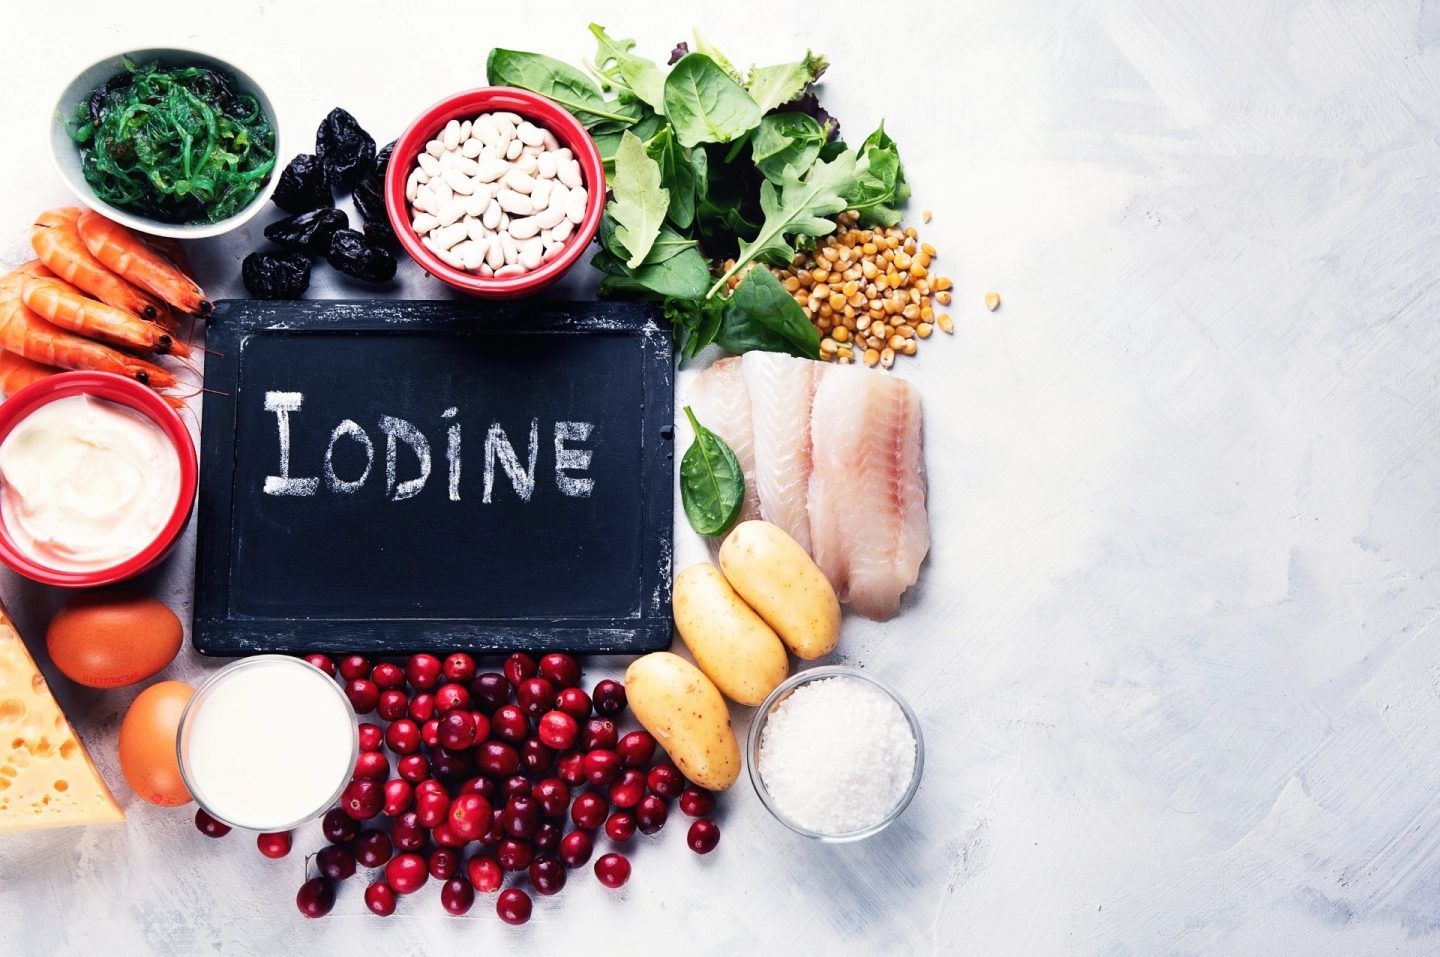 A birds-eye photo of a white marble tabletop on which is a range of food products, like seafood, milk, dairy, leafy vegetables. In the middle is a mini chalk board with 'iodine' written on it, to show the dietary sources of iodine.